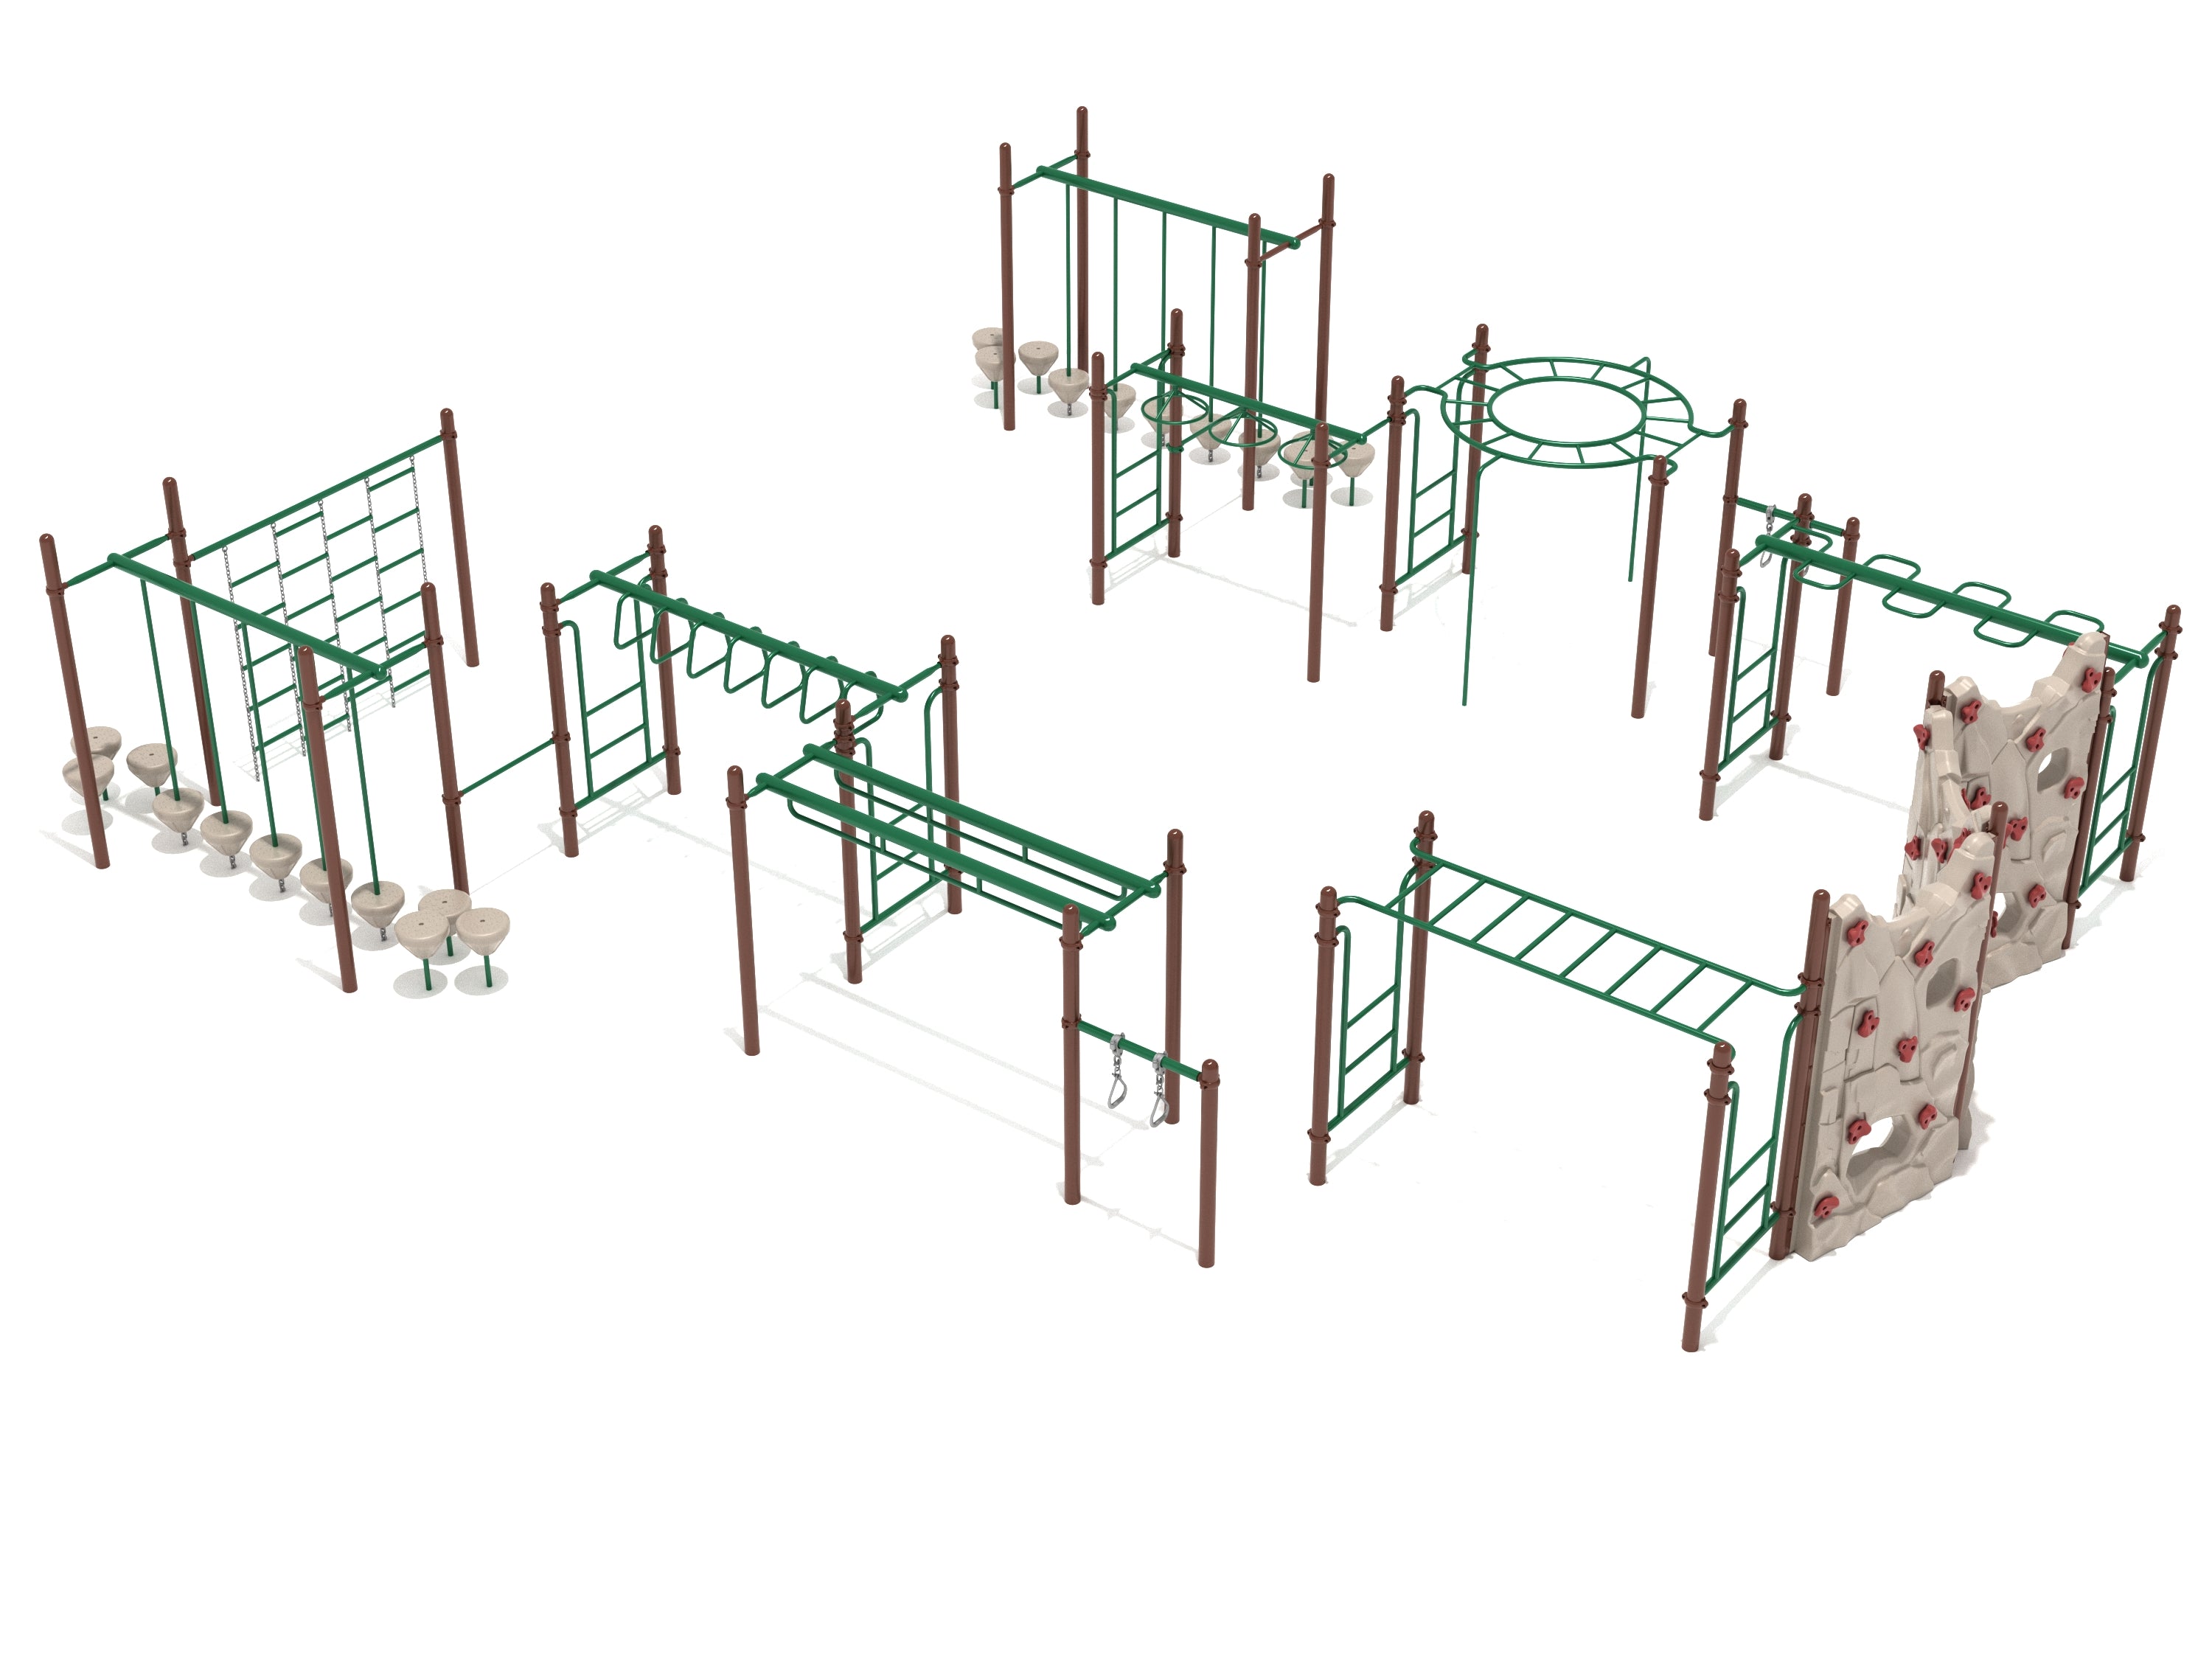 Rotonda Fitness Course Playground Neutral Colors